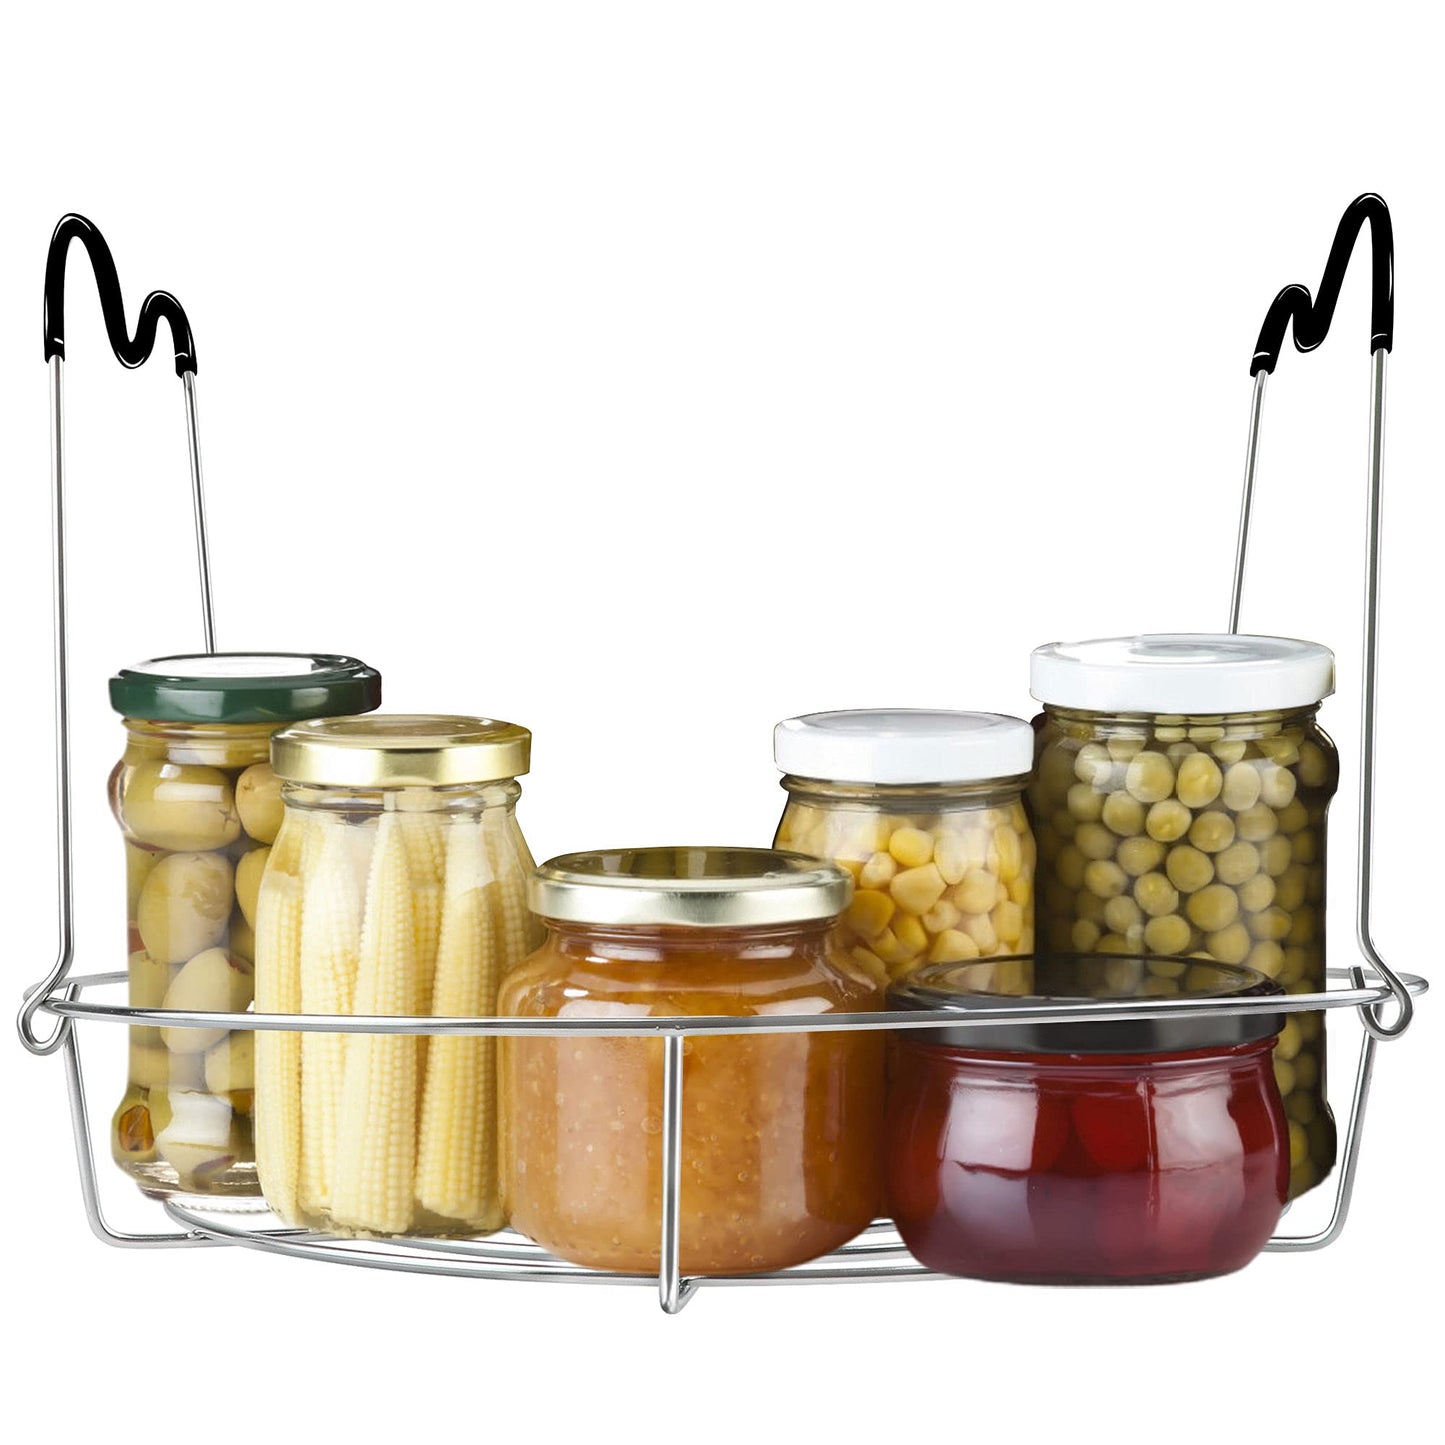 KORCCI 12in Stainless Steel Canning Rack with Contour Handles, Holds 7 Pint or 6 Quart Jars in Pressure Canner Pot